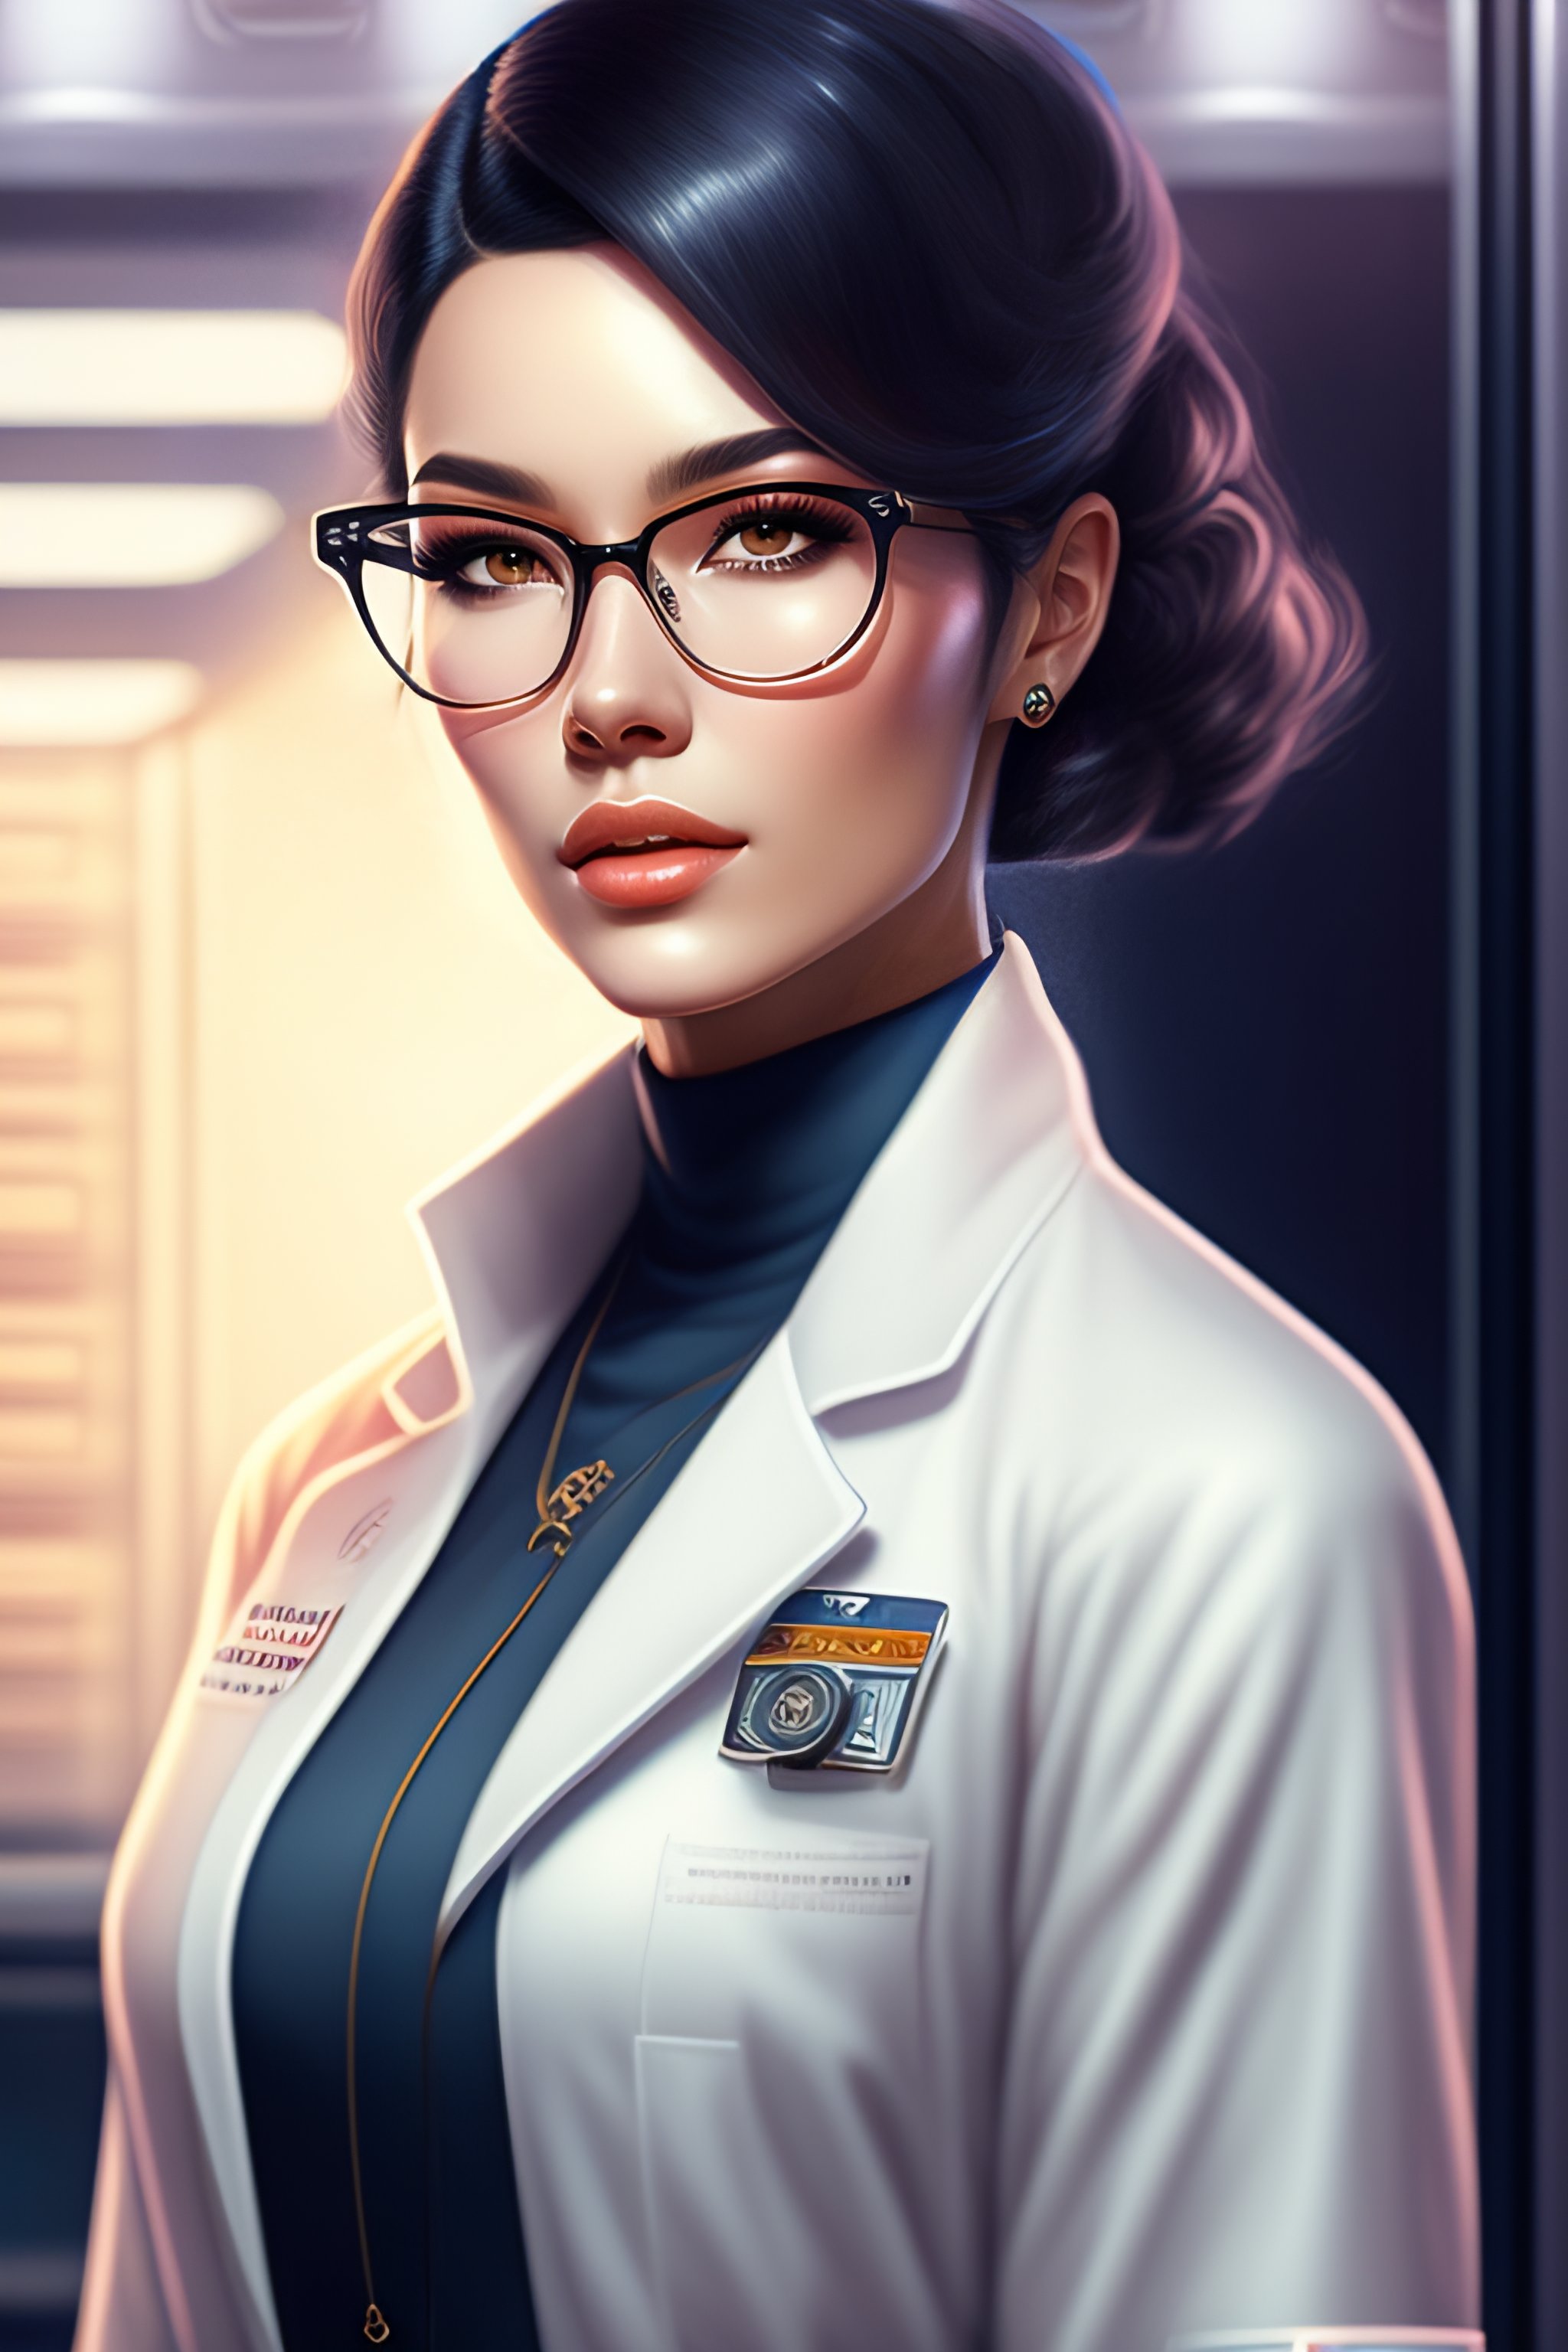 Lexica - Lisa Blackpinkwith short white hair, wearing lab coat and ...